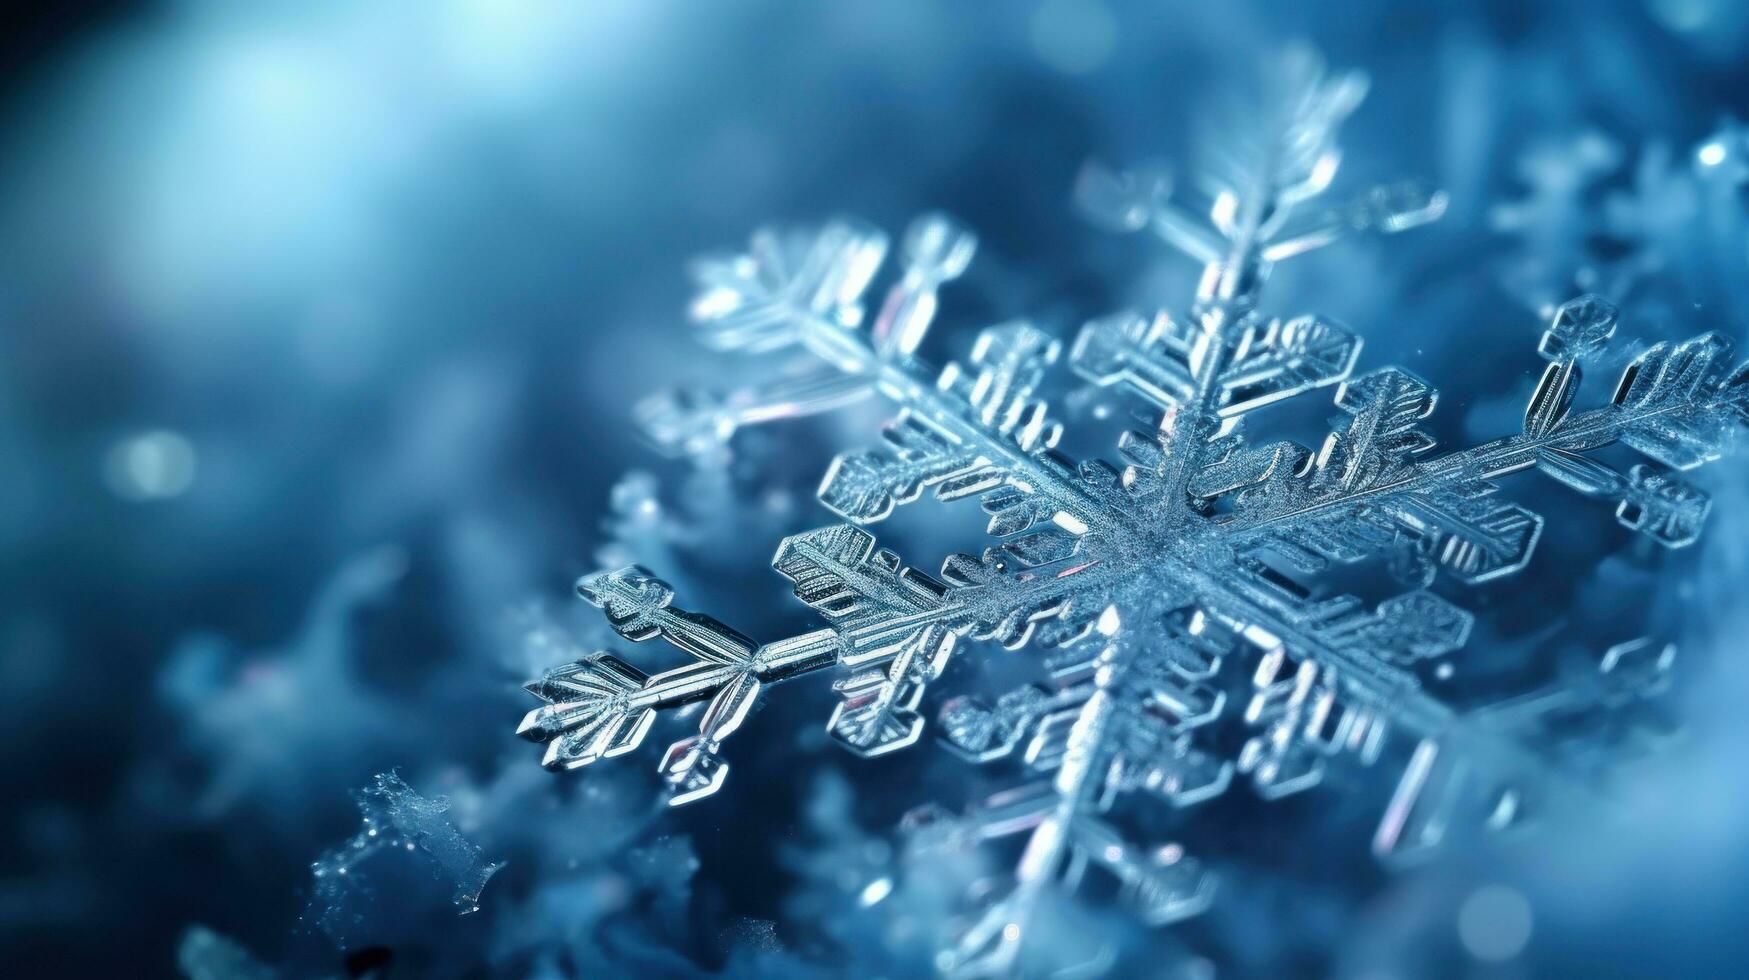 Snowflake Wallpaper , Image and Background for Free Download